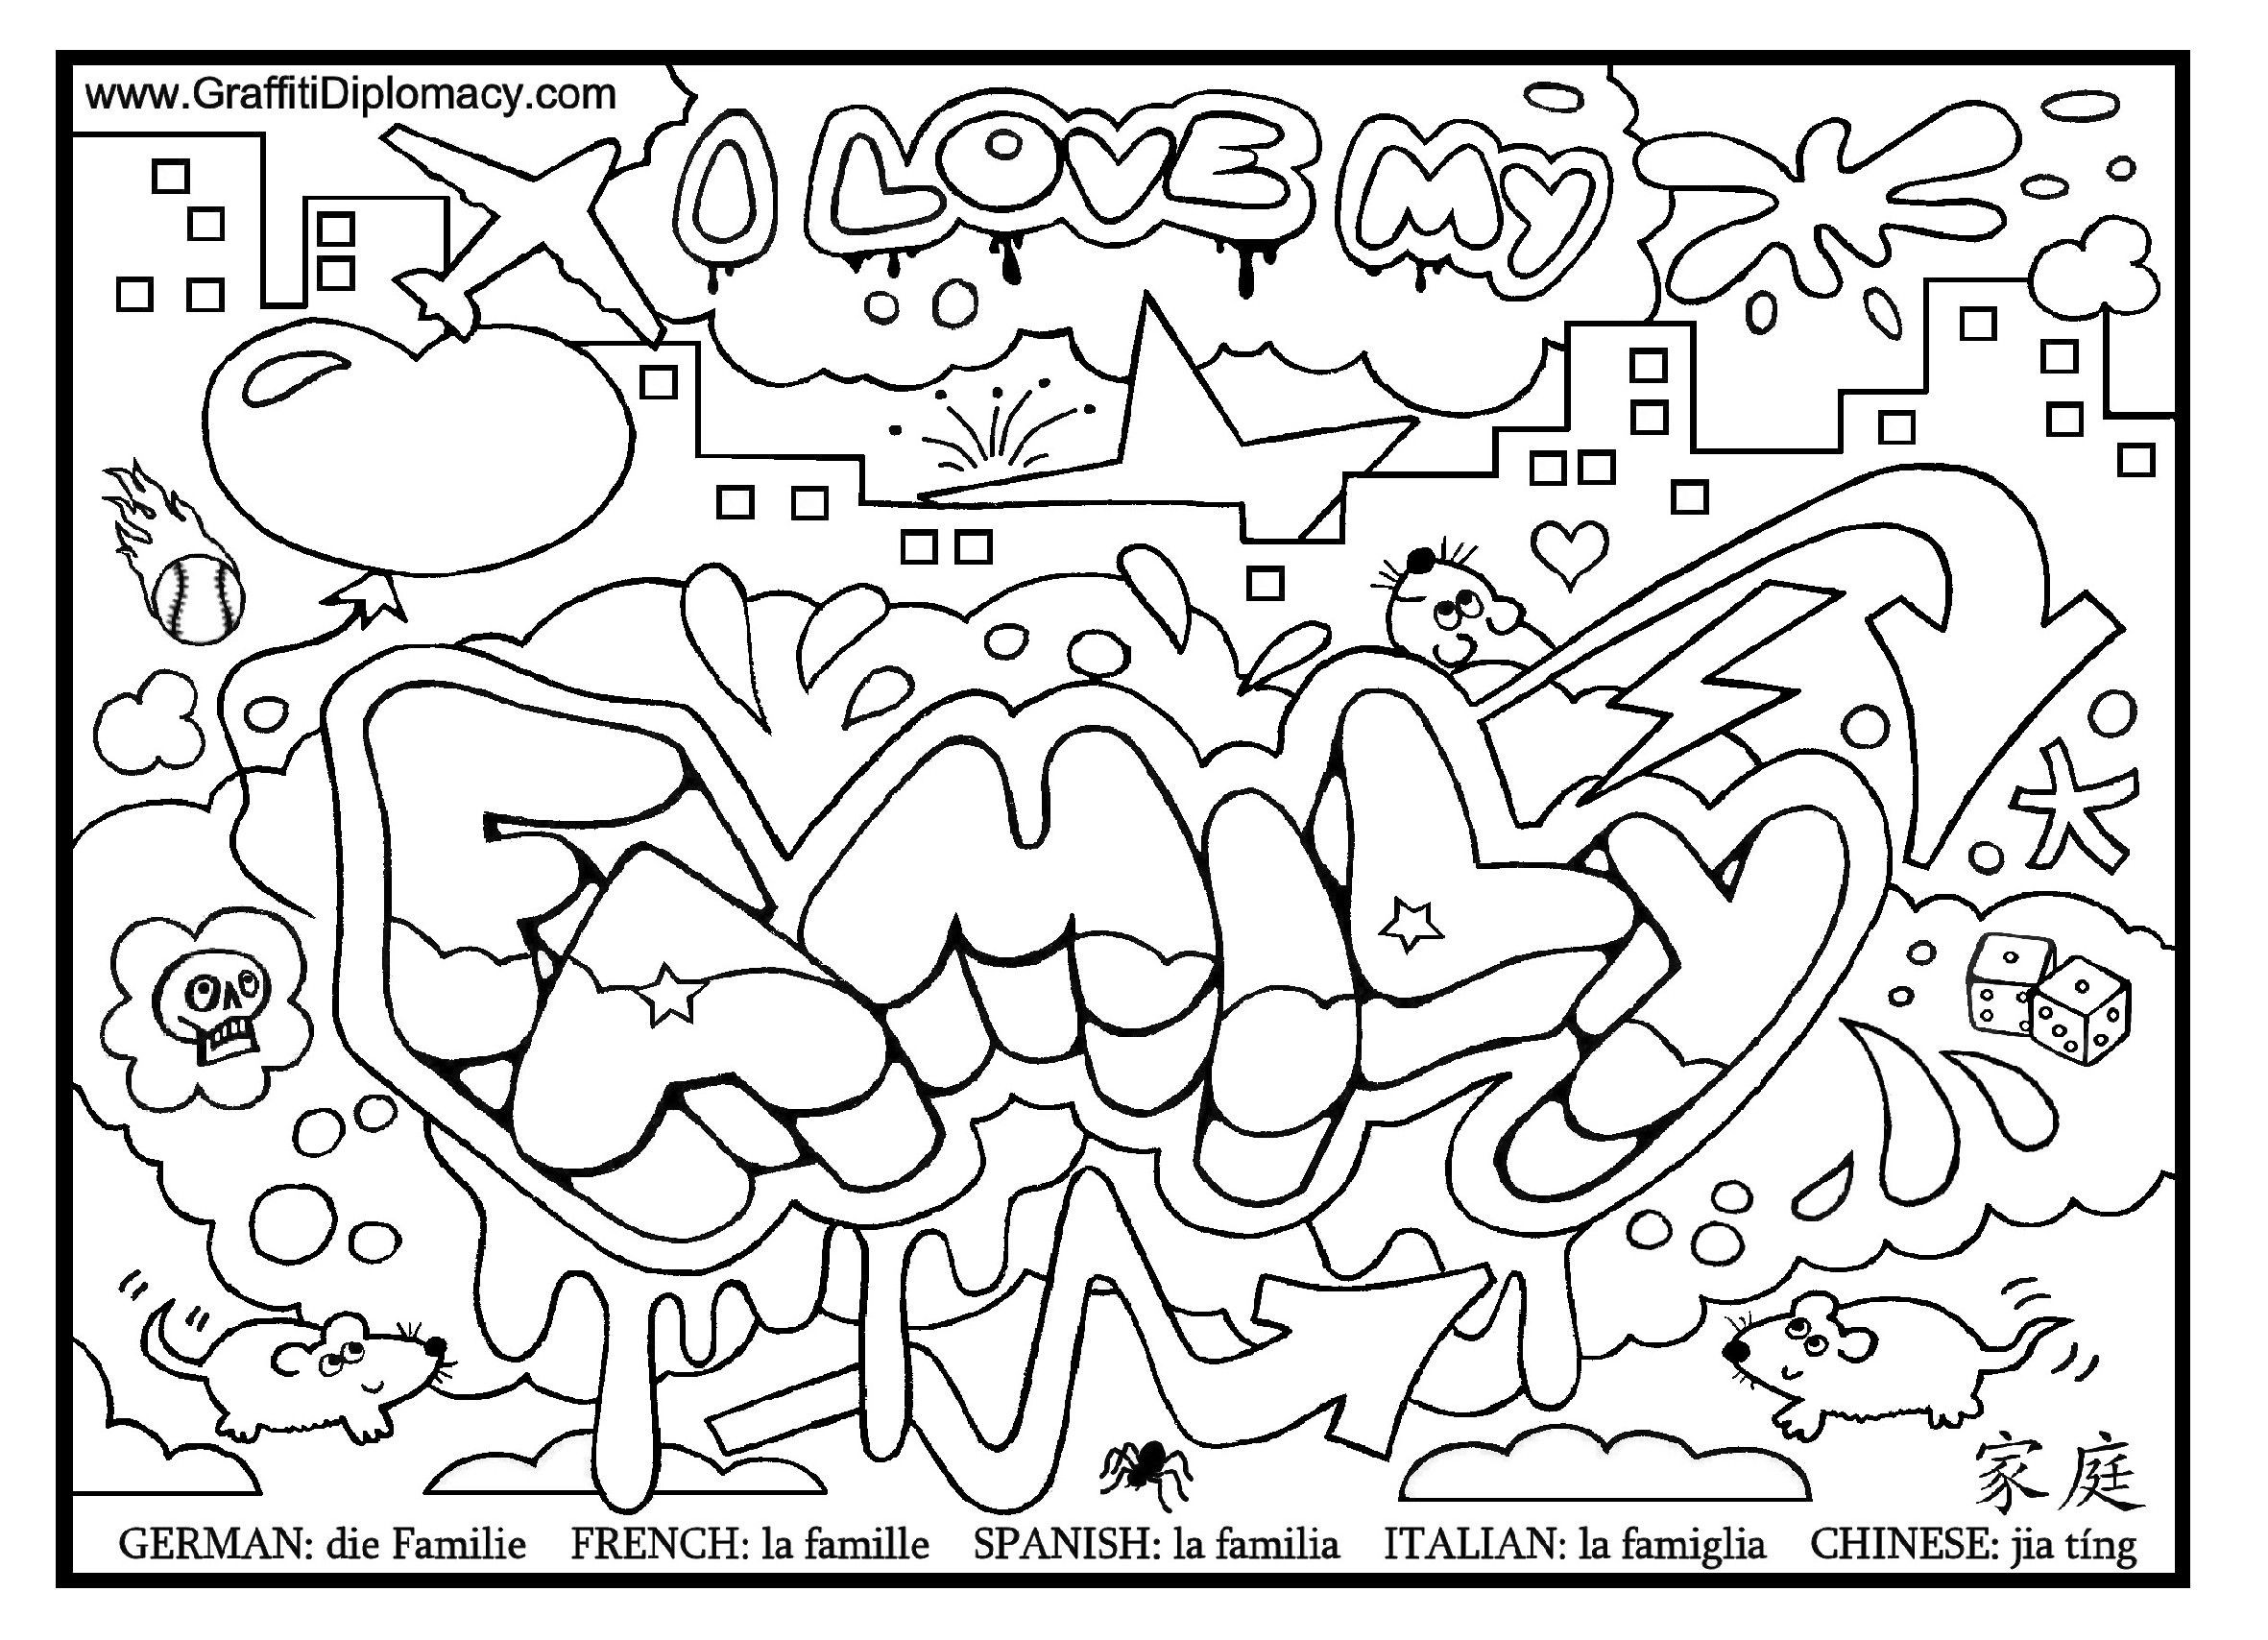 Girls Coling You Names Coloring Pages
 I LOVE MY FAMILY Free Multicultural Graffiti Coloring